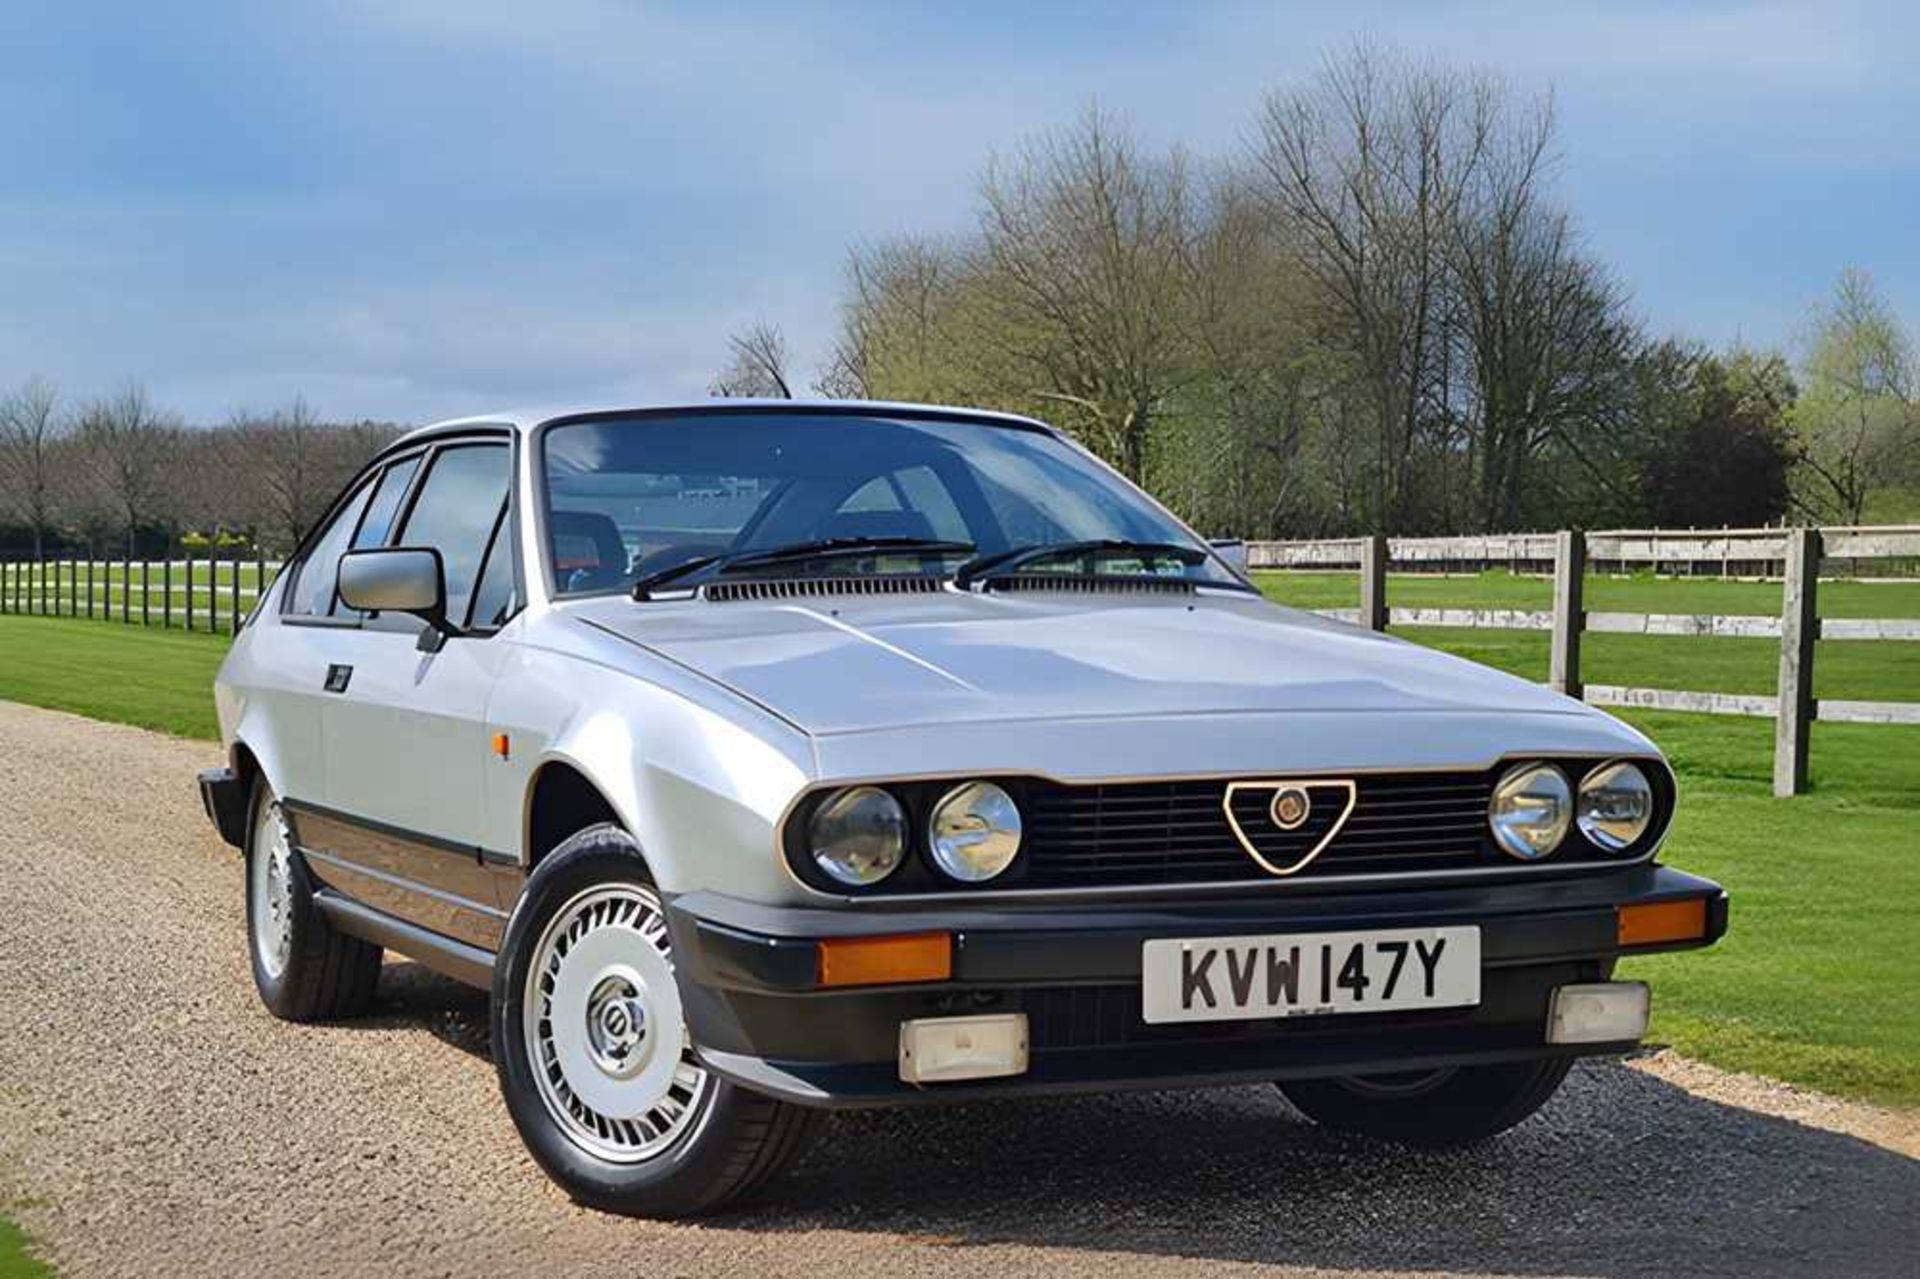 1983 Alfa Romeo GTV 2.0 litre Single family ownership and 48,000 miles from new